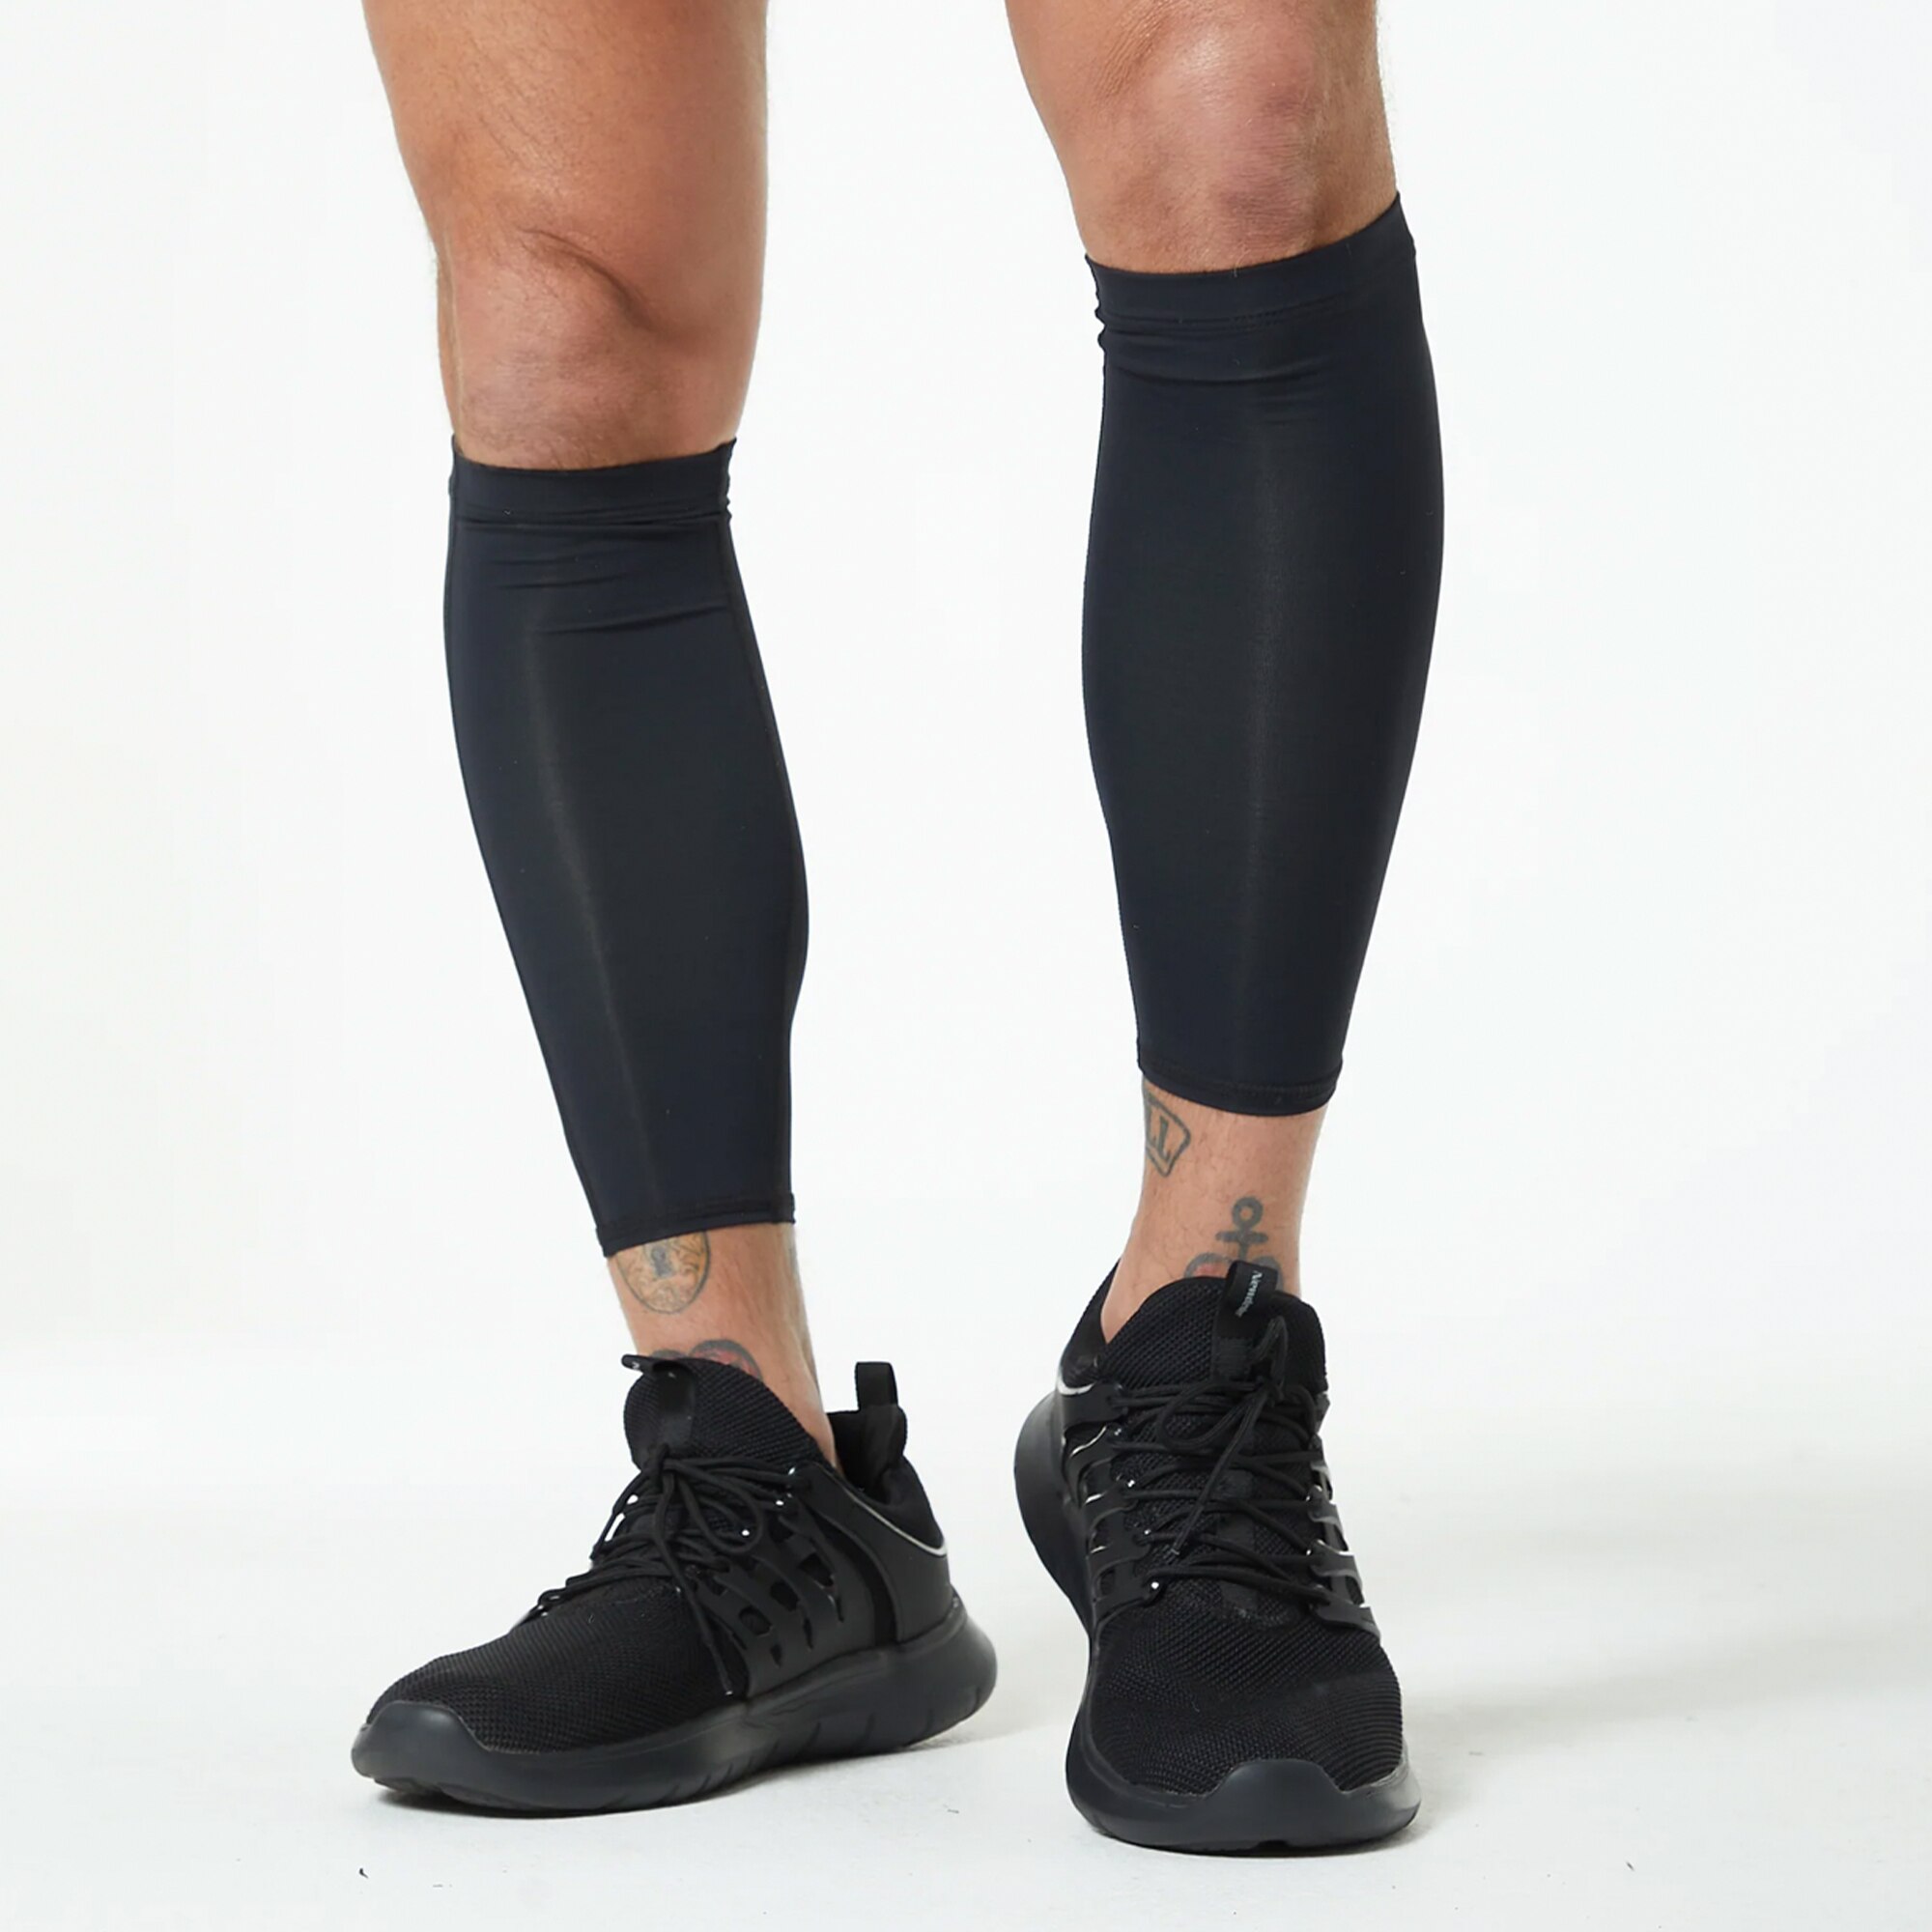 DNFD Active AX Compression Calf Sleeves